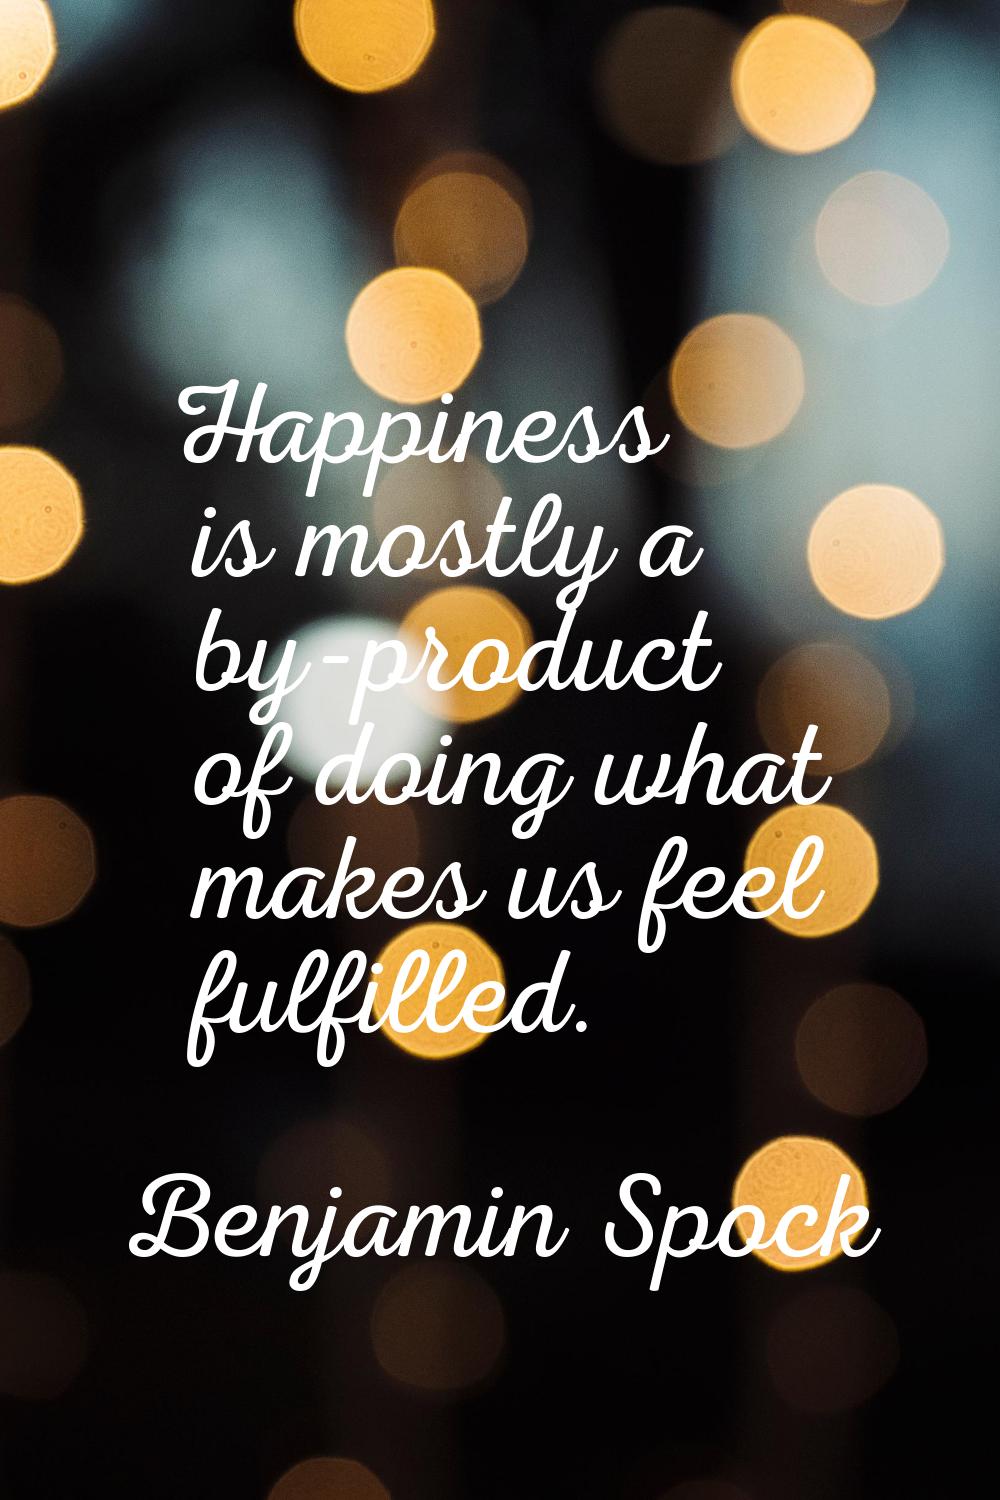 Happiness is mostly a by-product of doing what makes us feel fulfilled.